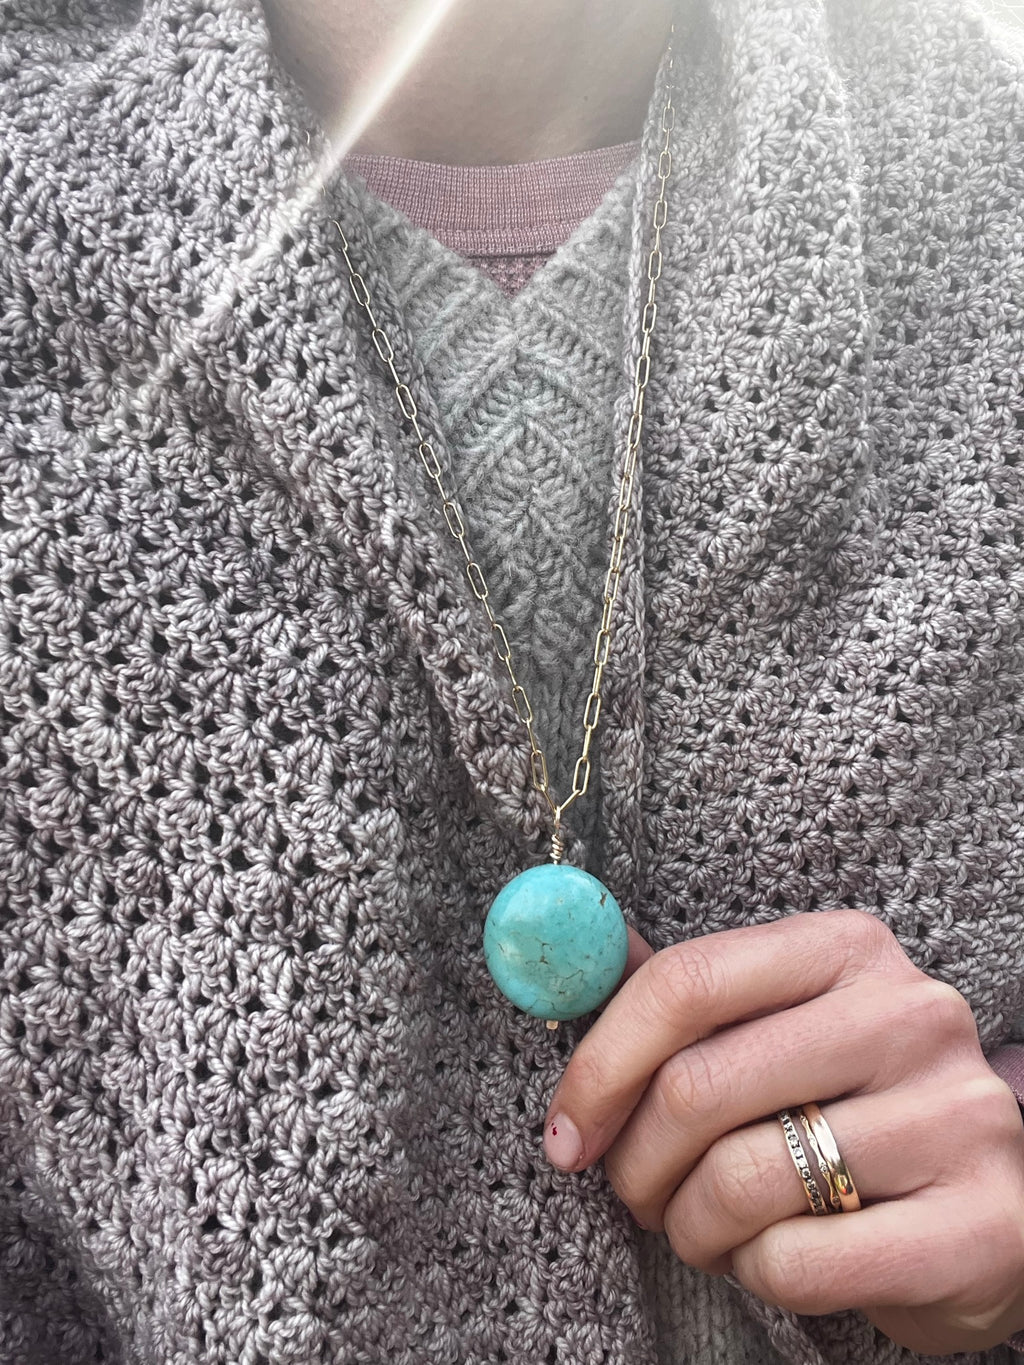 Turquoise pebble necklace #1